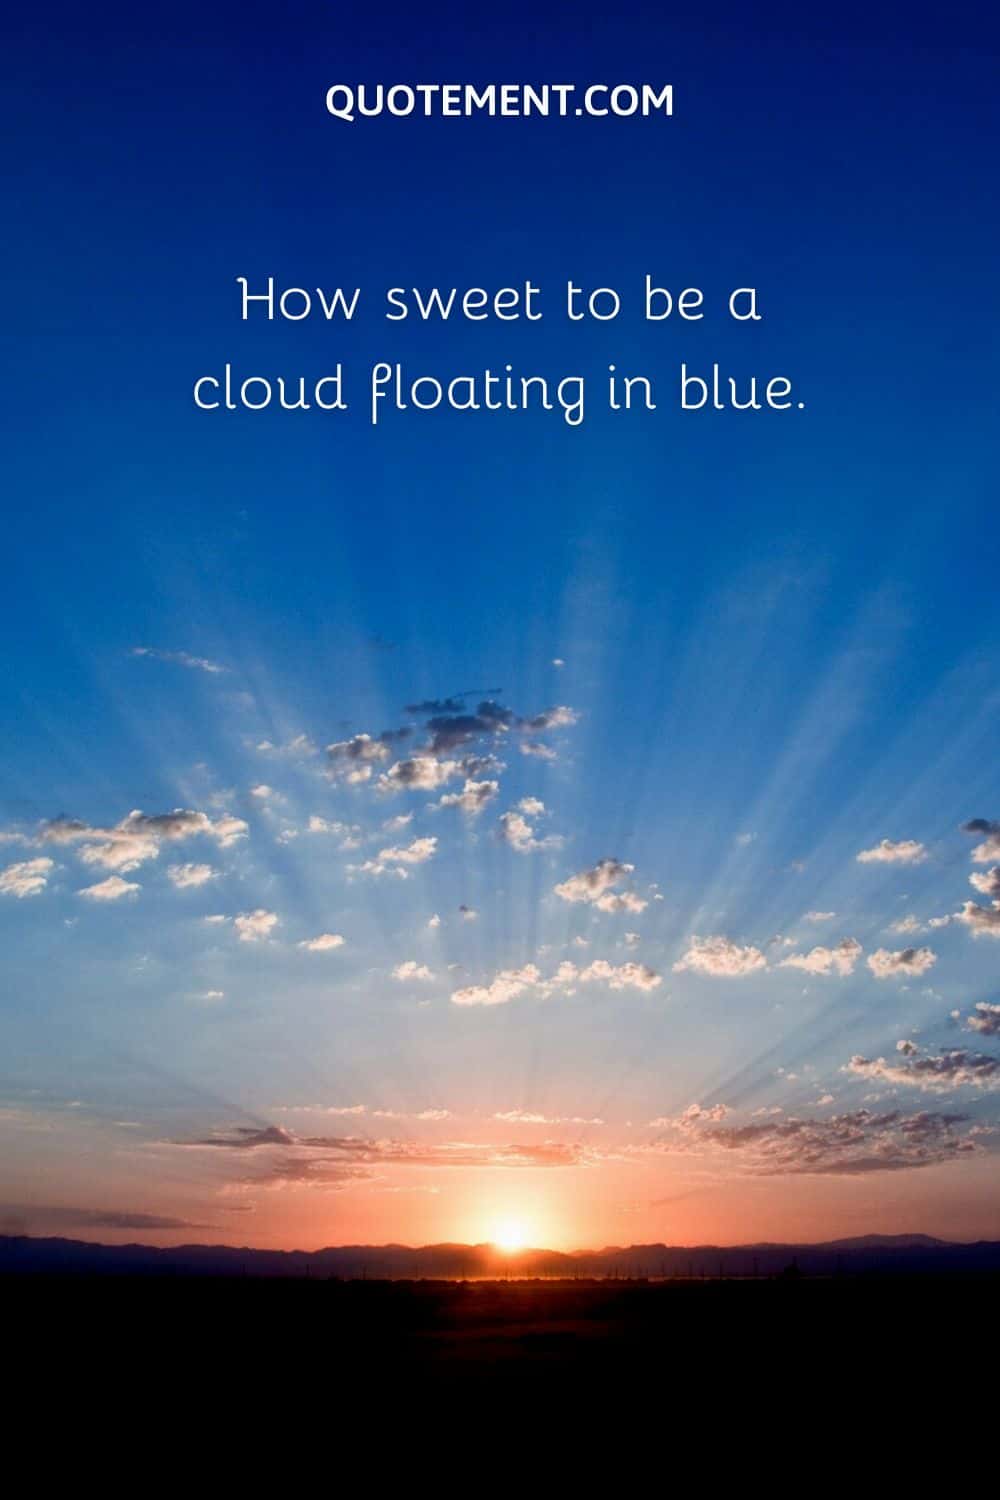 How sweet to be a cloud floating in blue.